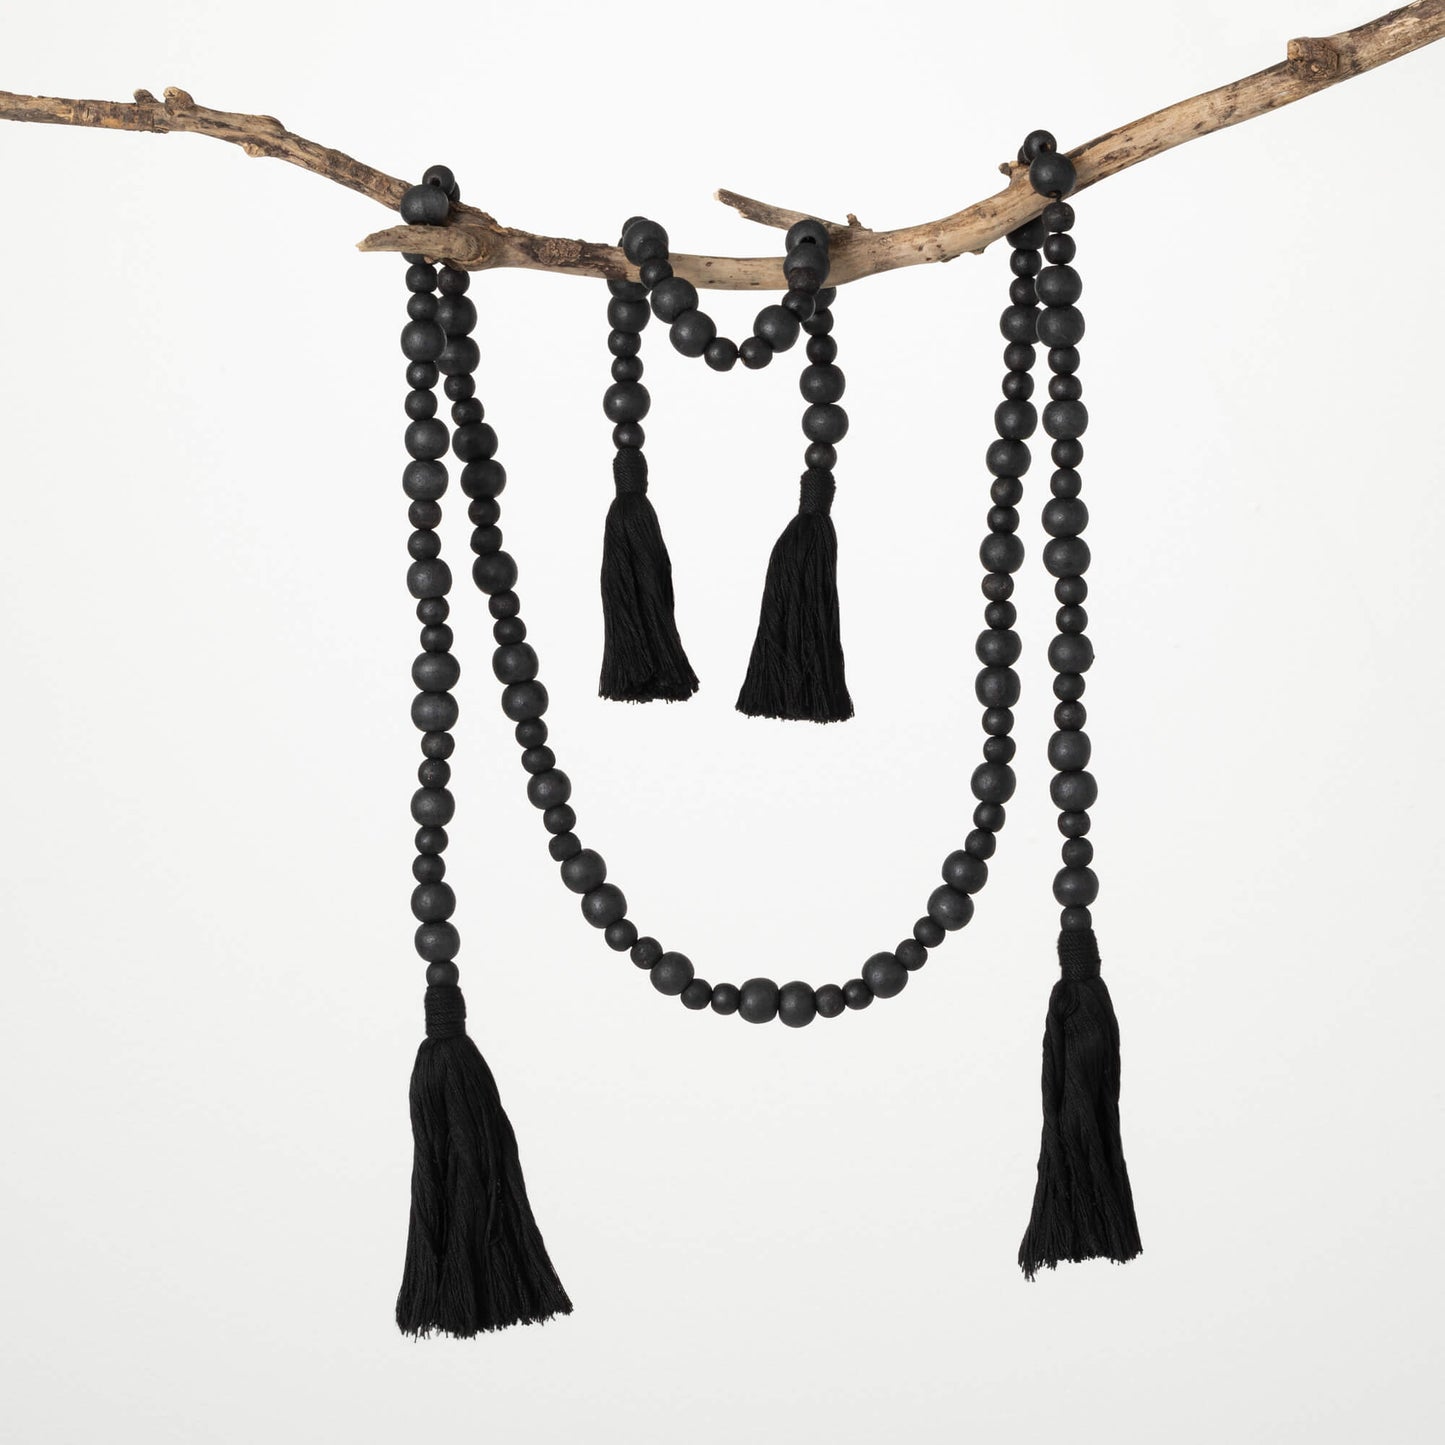 large and small black beaded garlands with tassels on each end draped over a branch.